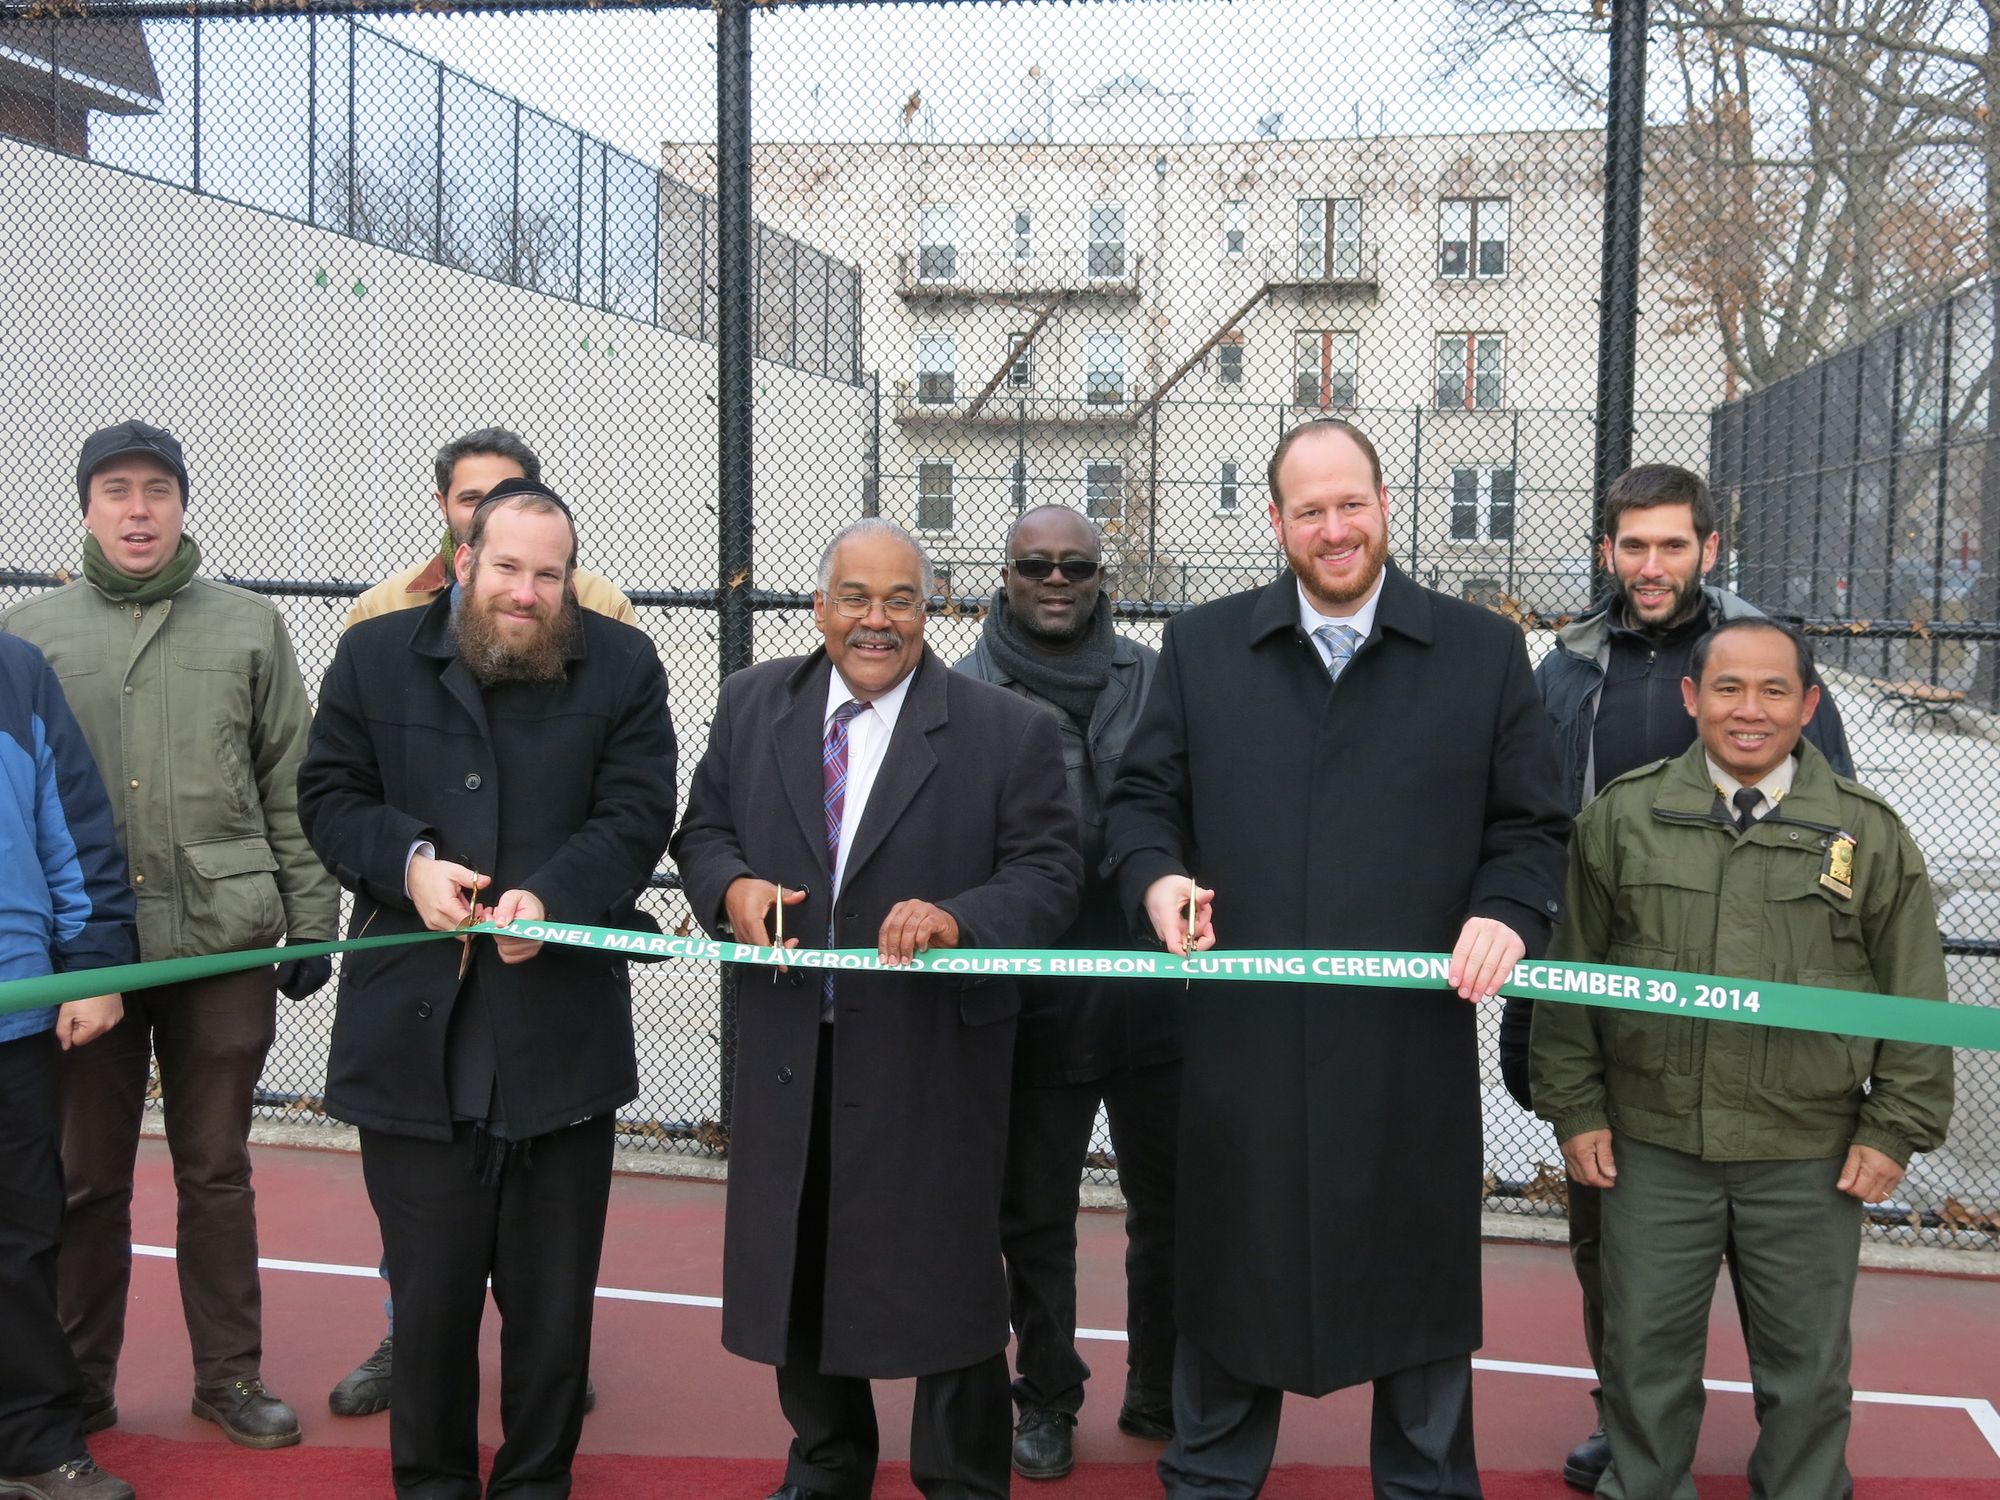 New Handball & Basketball Courts Unveiled At Colonel David Marcus Park